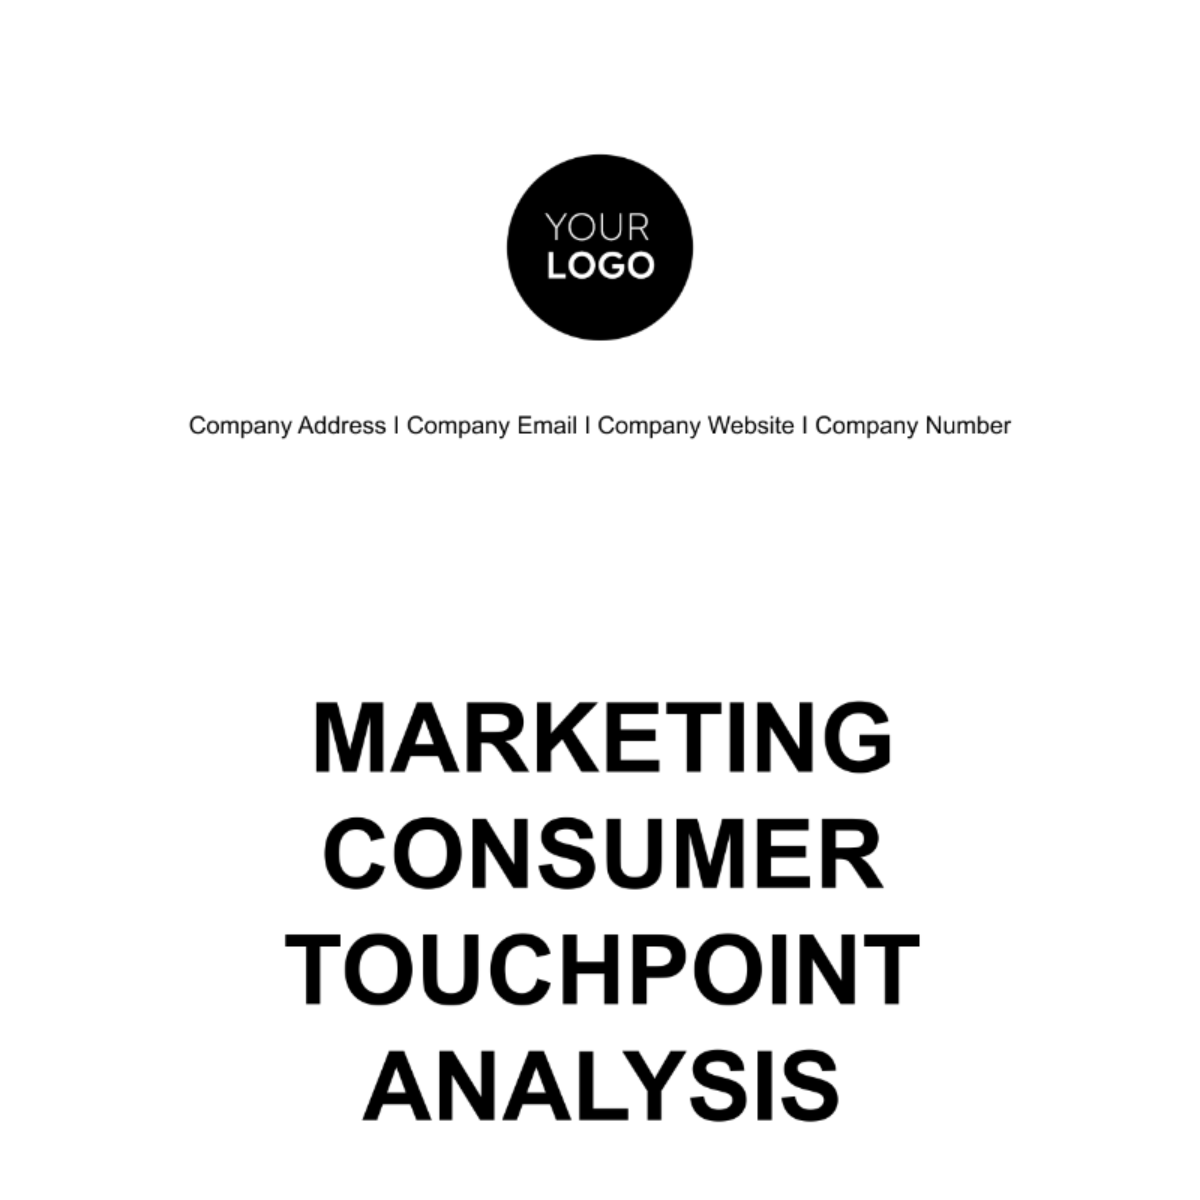 Marketing Consumer Touchpoint Analysis Template